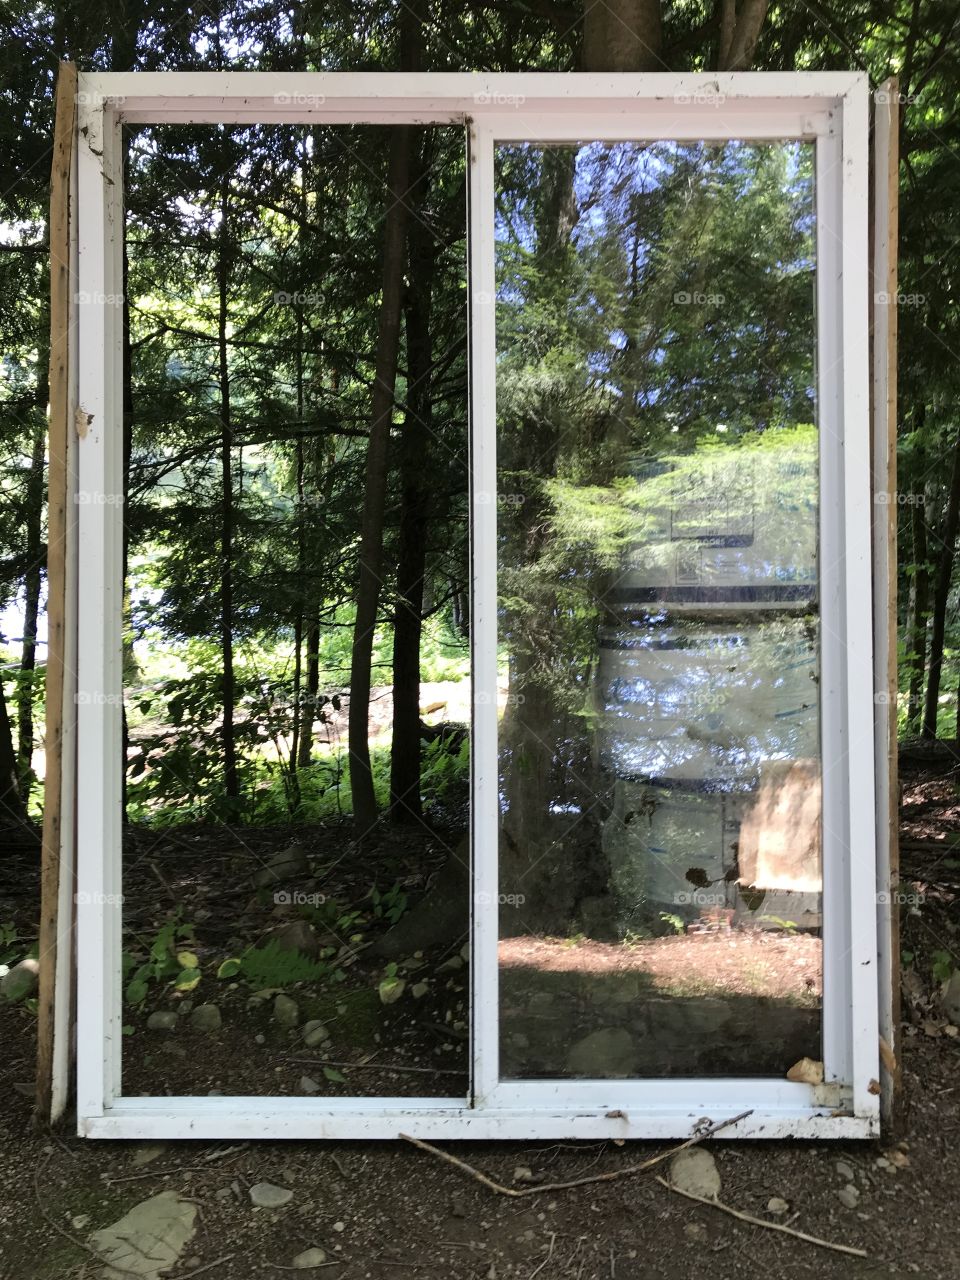 Reflecting ,sliding Glassdoor ,waiting to be placed in porch